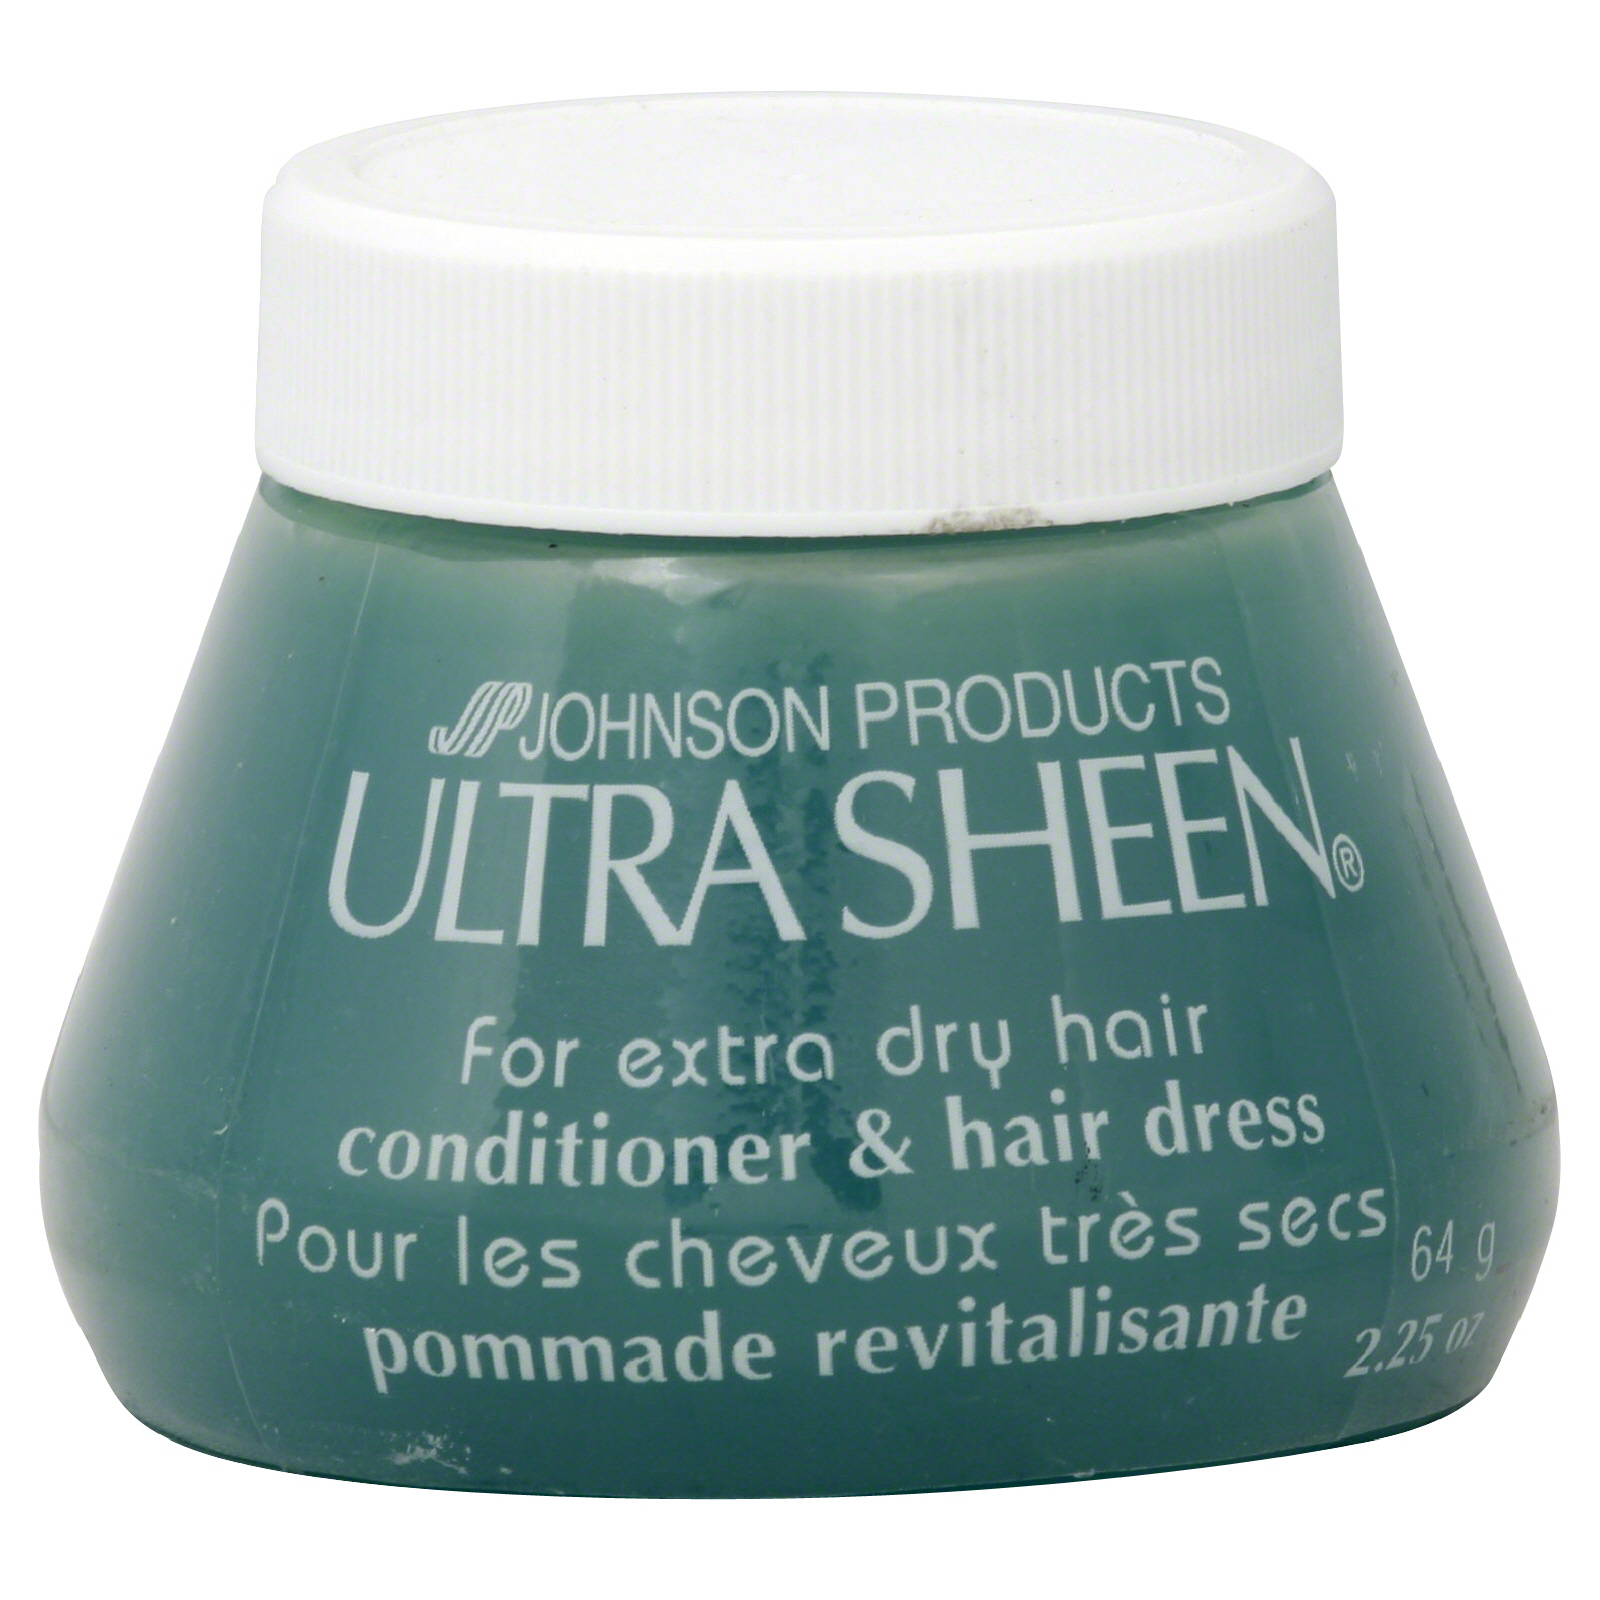 Johnson Brothers Ultra Sheen Conditioner & Hair Dress, for Extra Dry Hair, 2.25 oz (65 g)